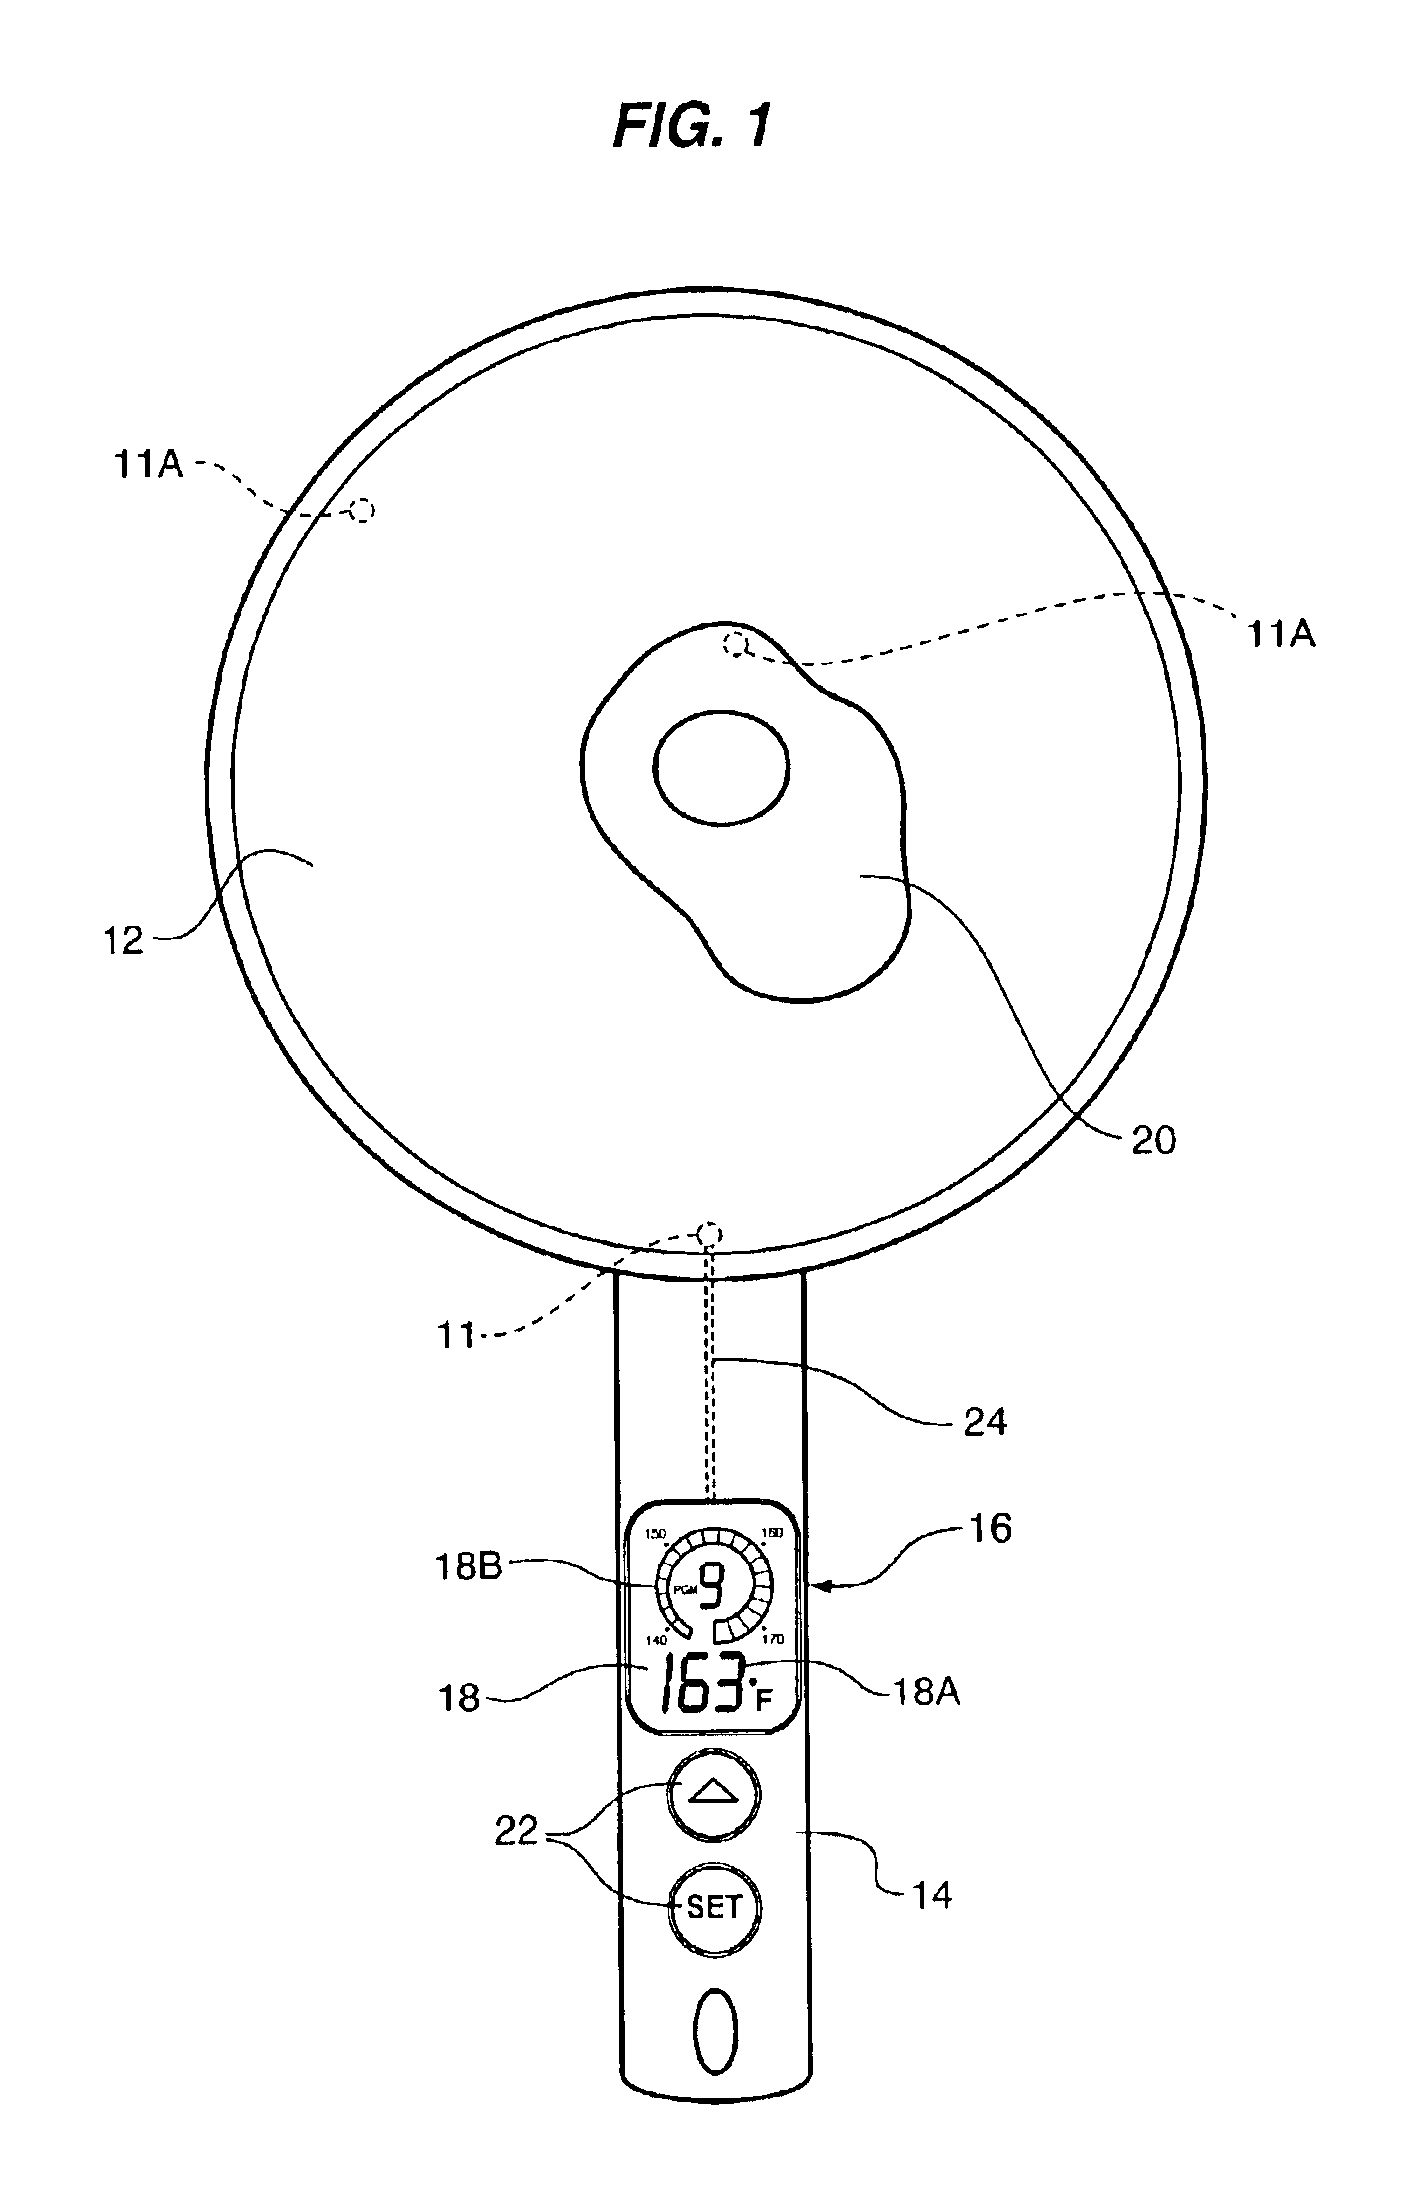 Electronic frying pan systems and methods